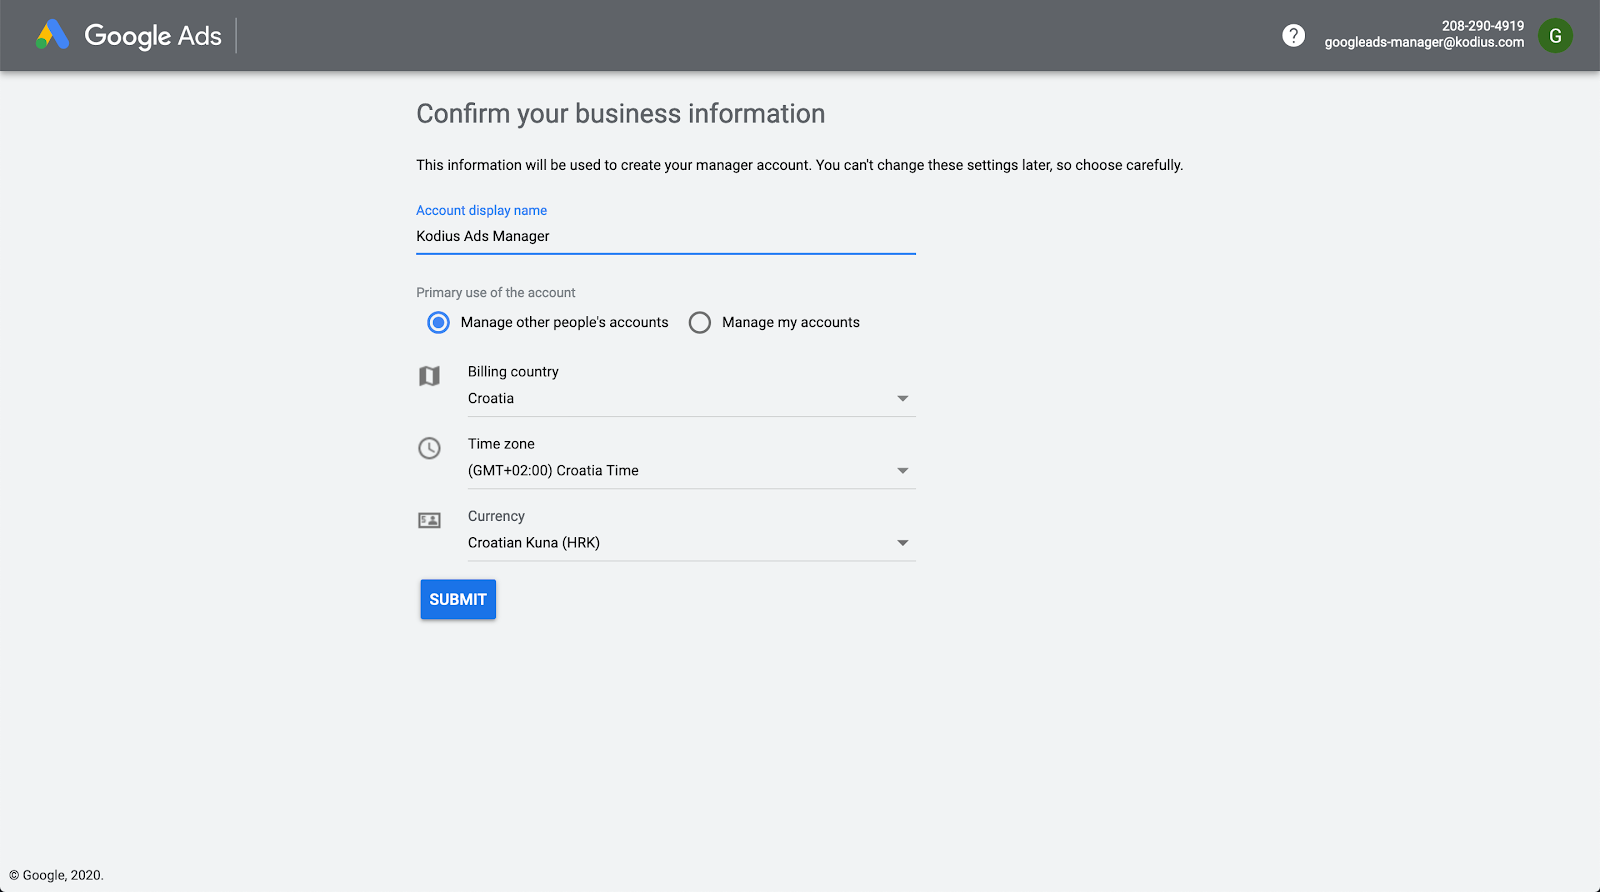 Google ads confirm your business information